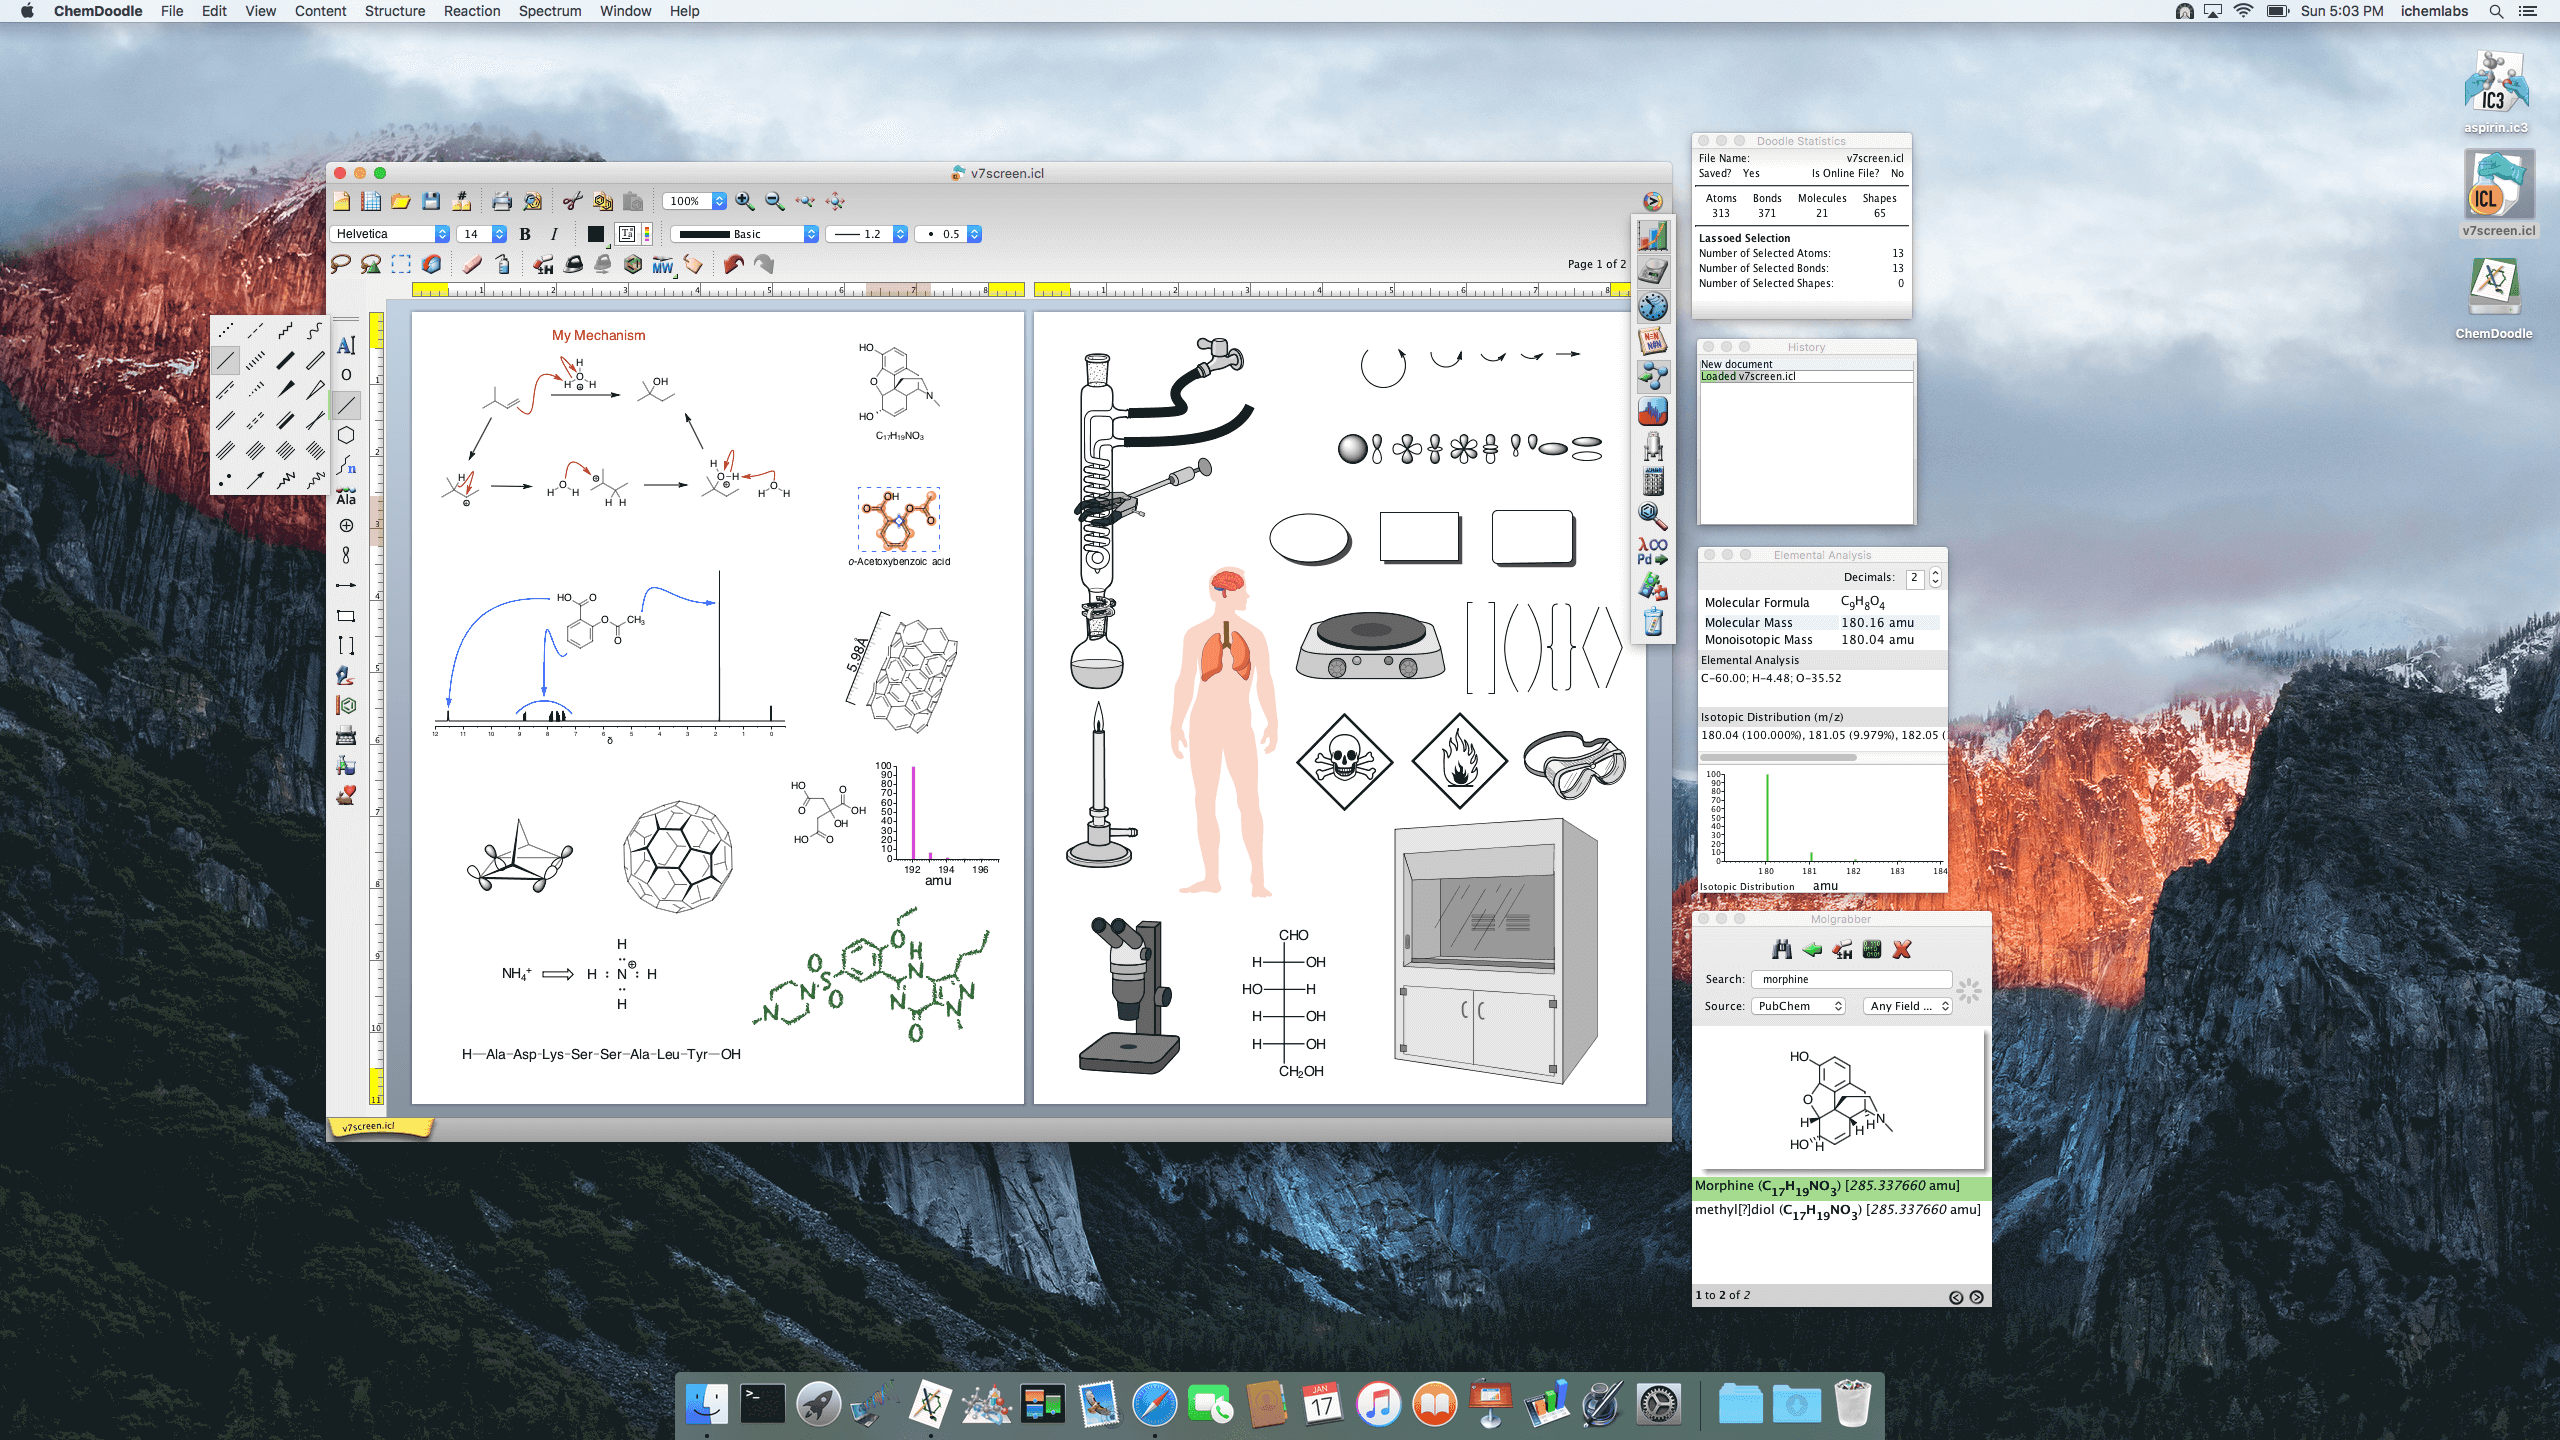 chemdoodle export animation